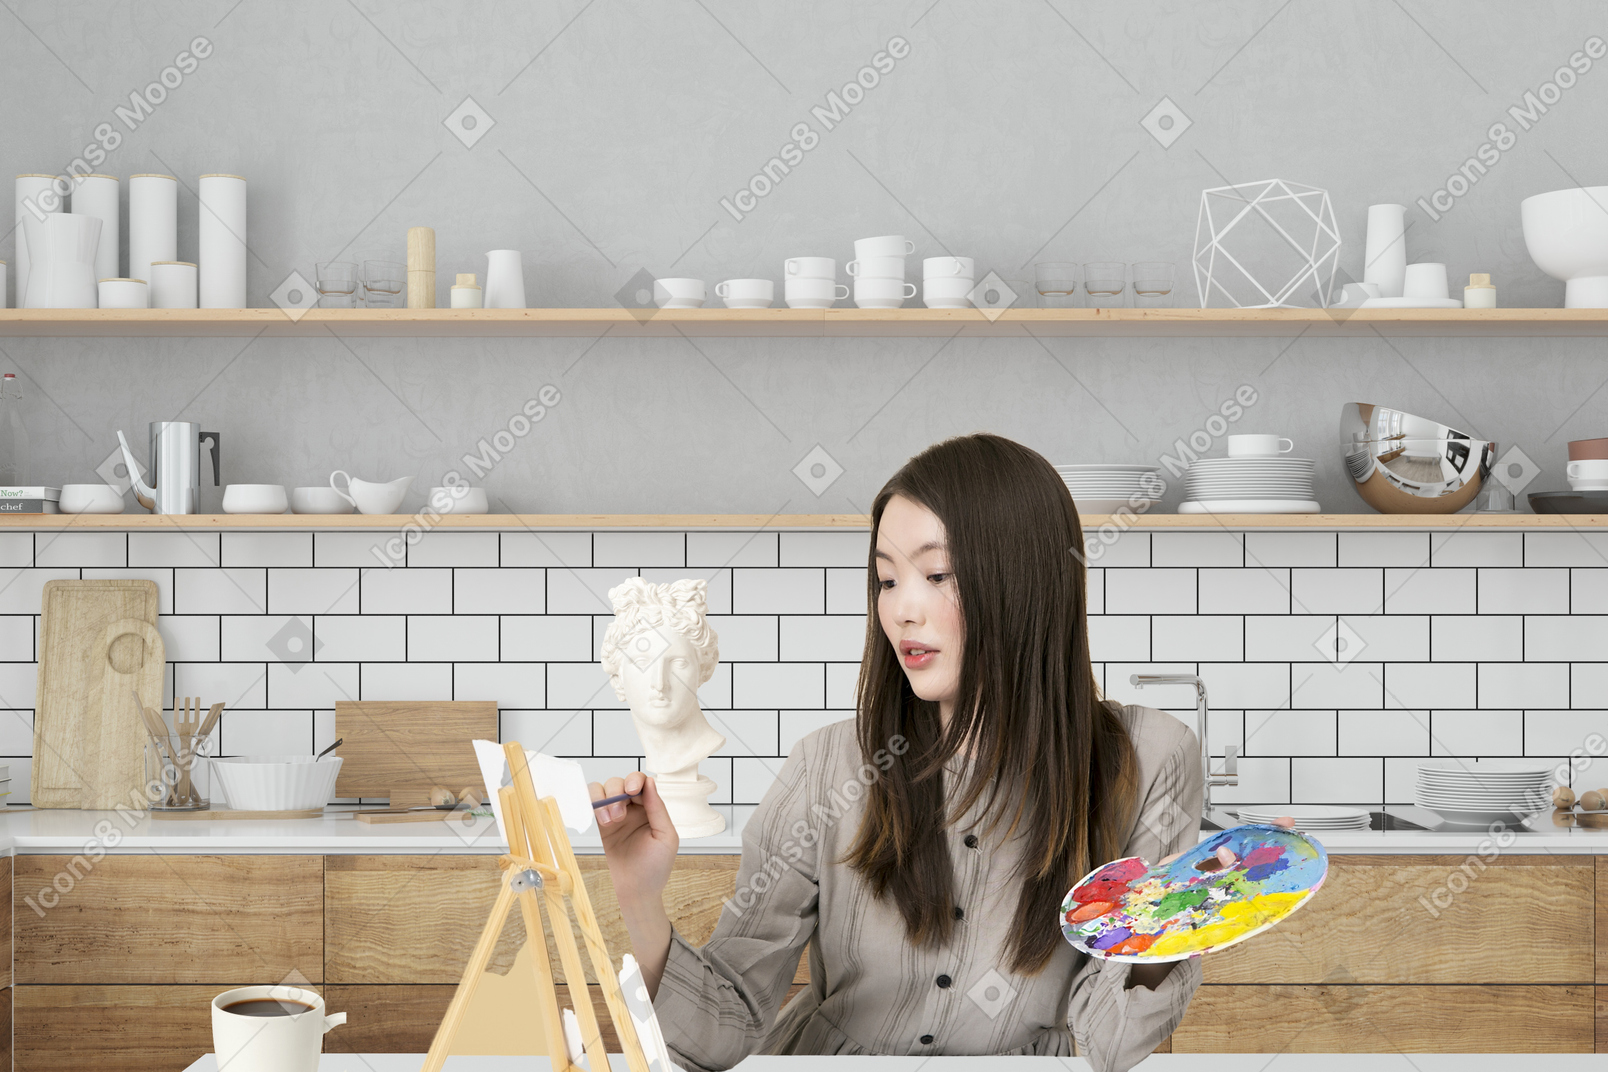 A woman sitting at a table holding a paintbrush and an easel